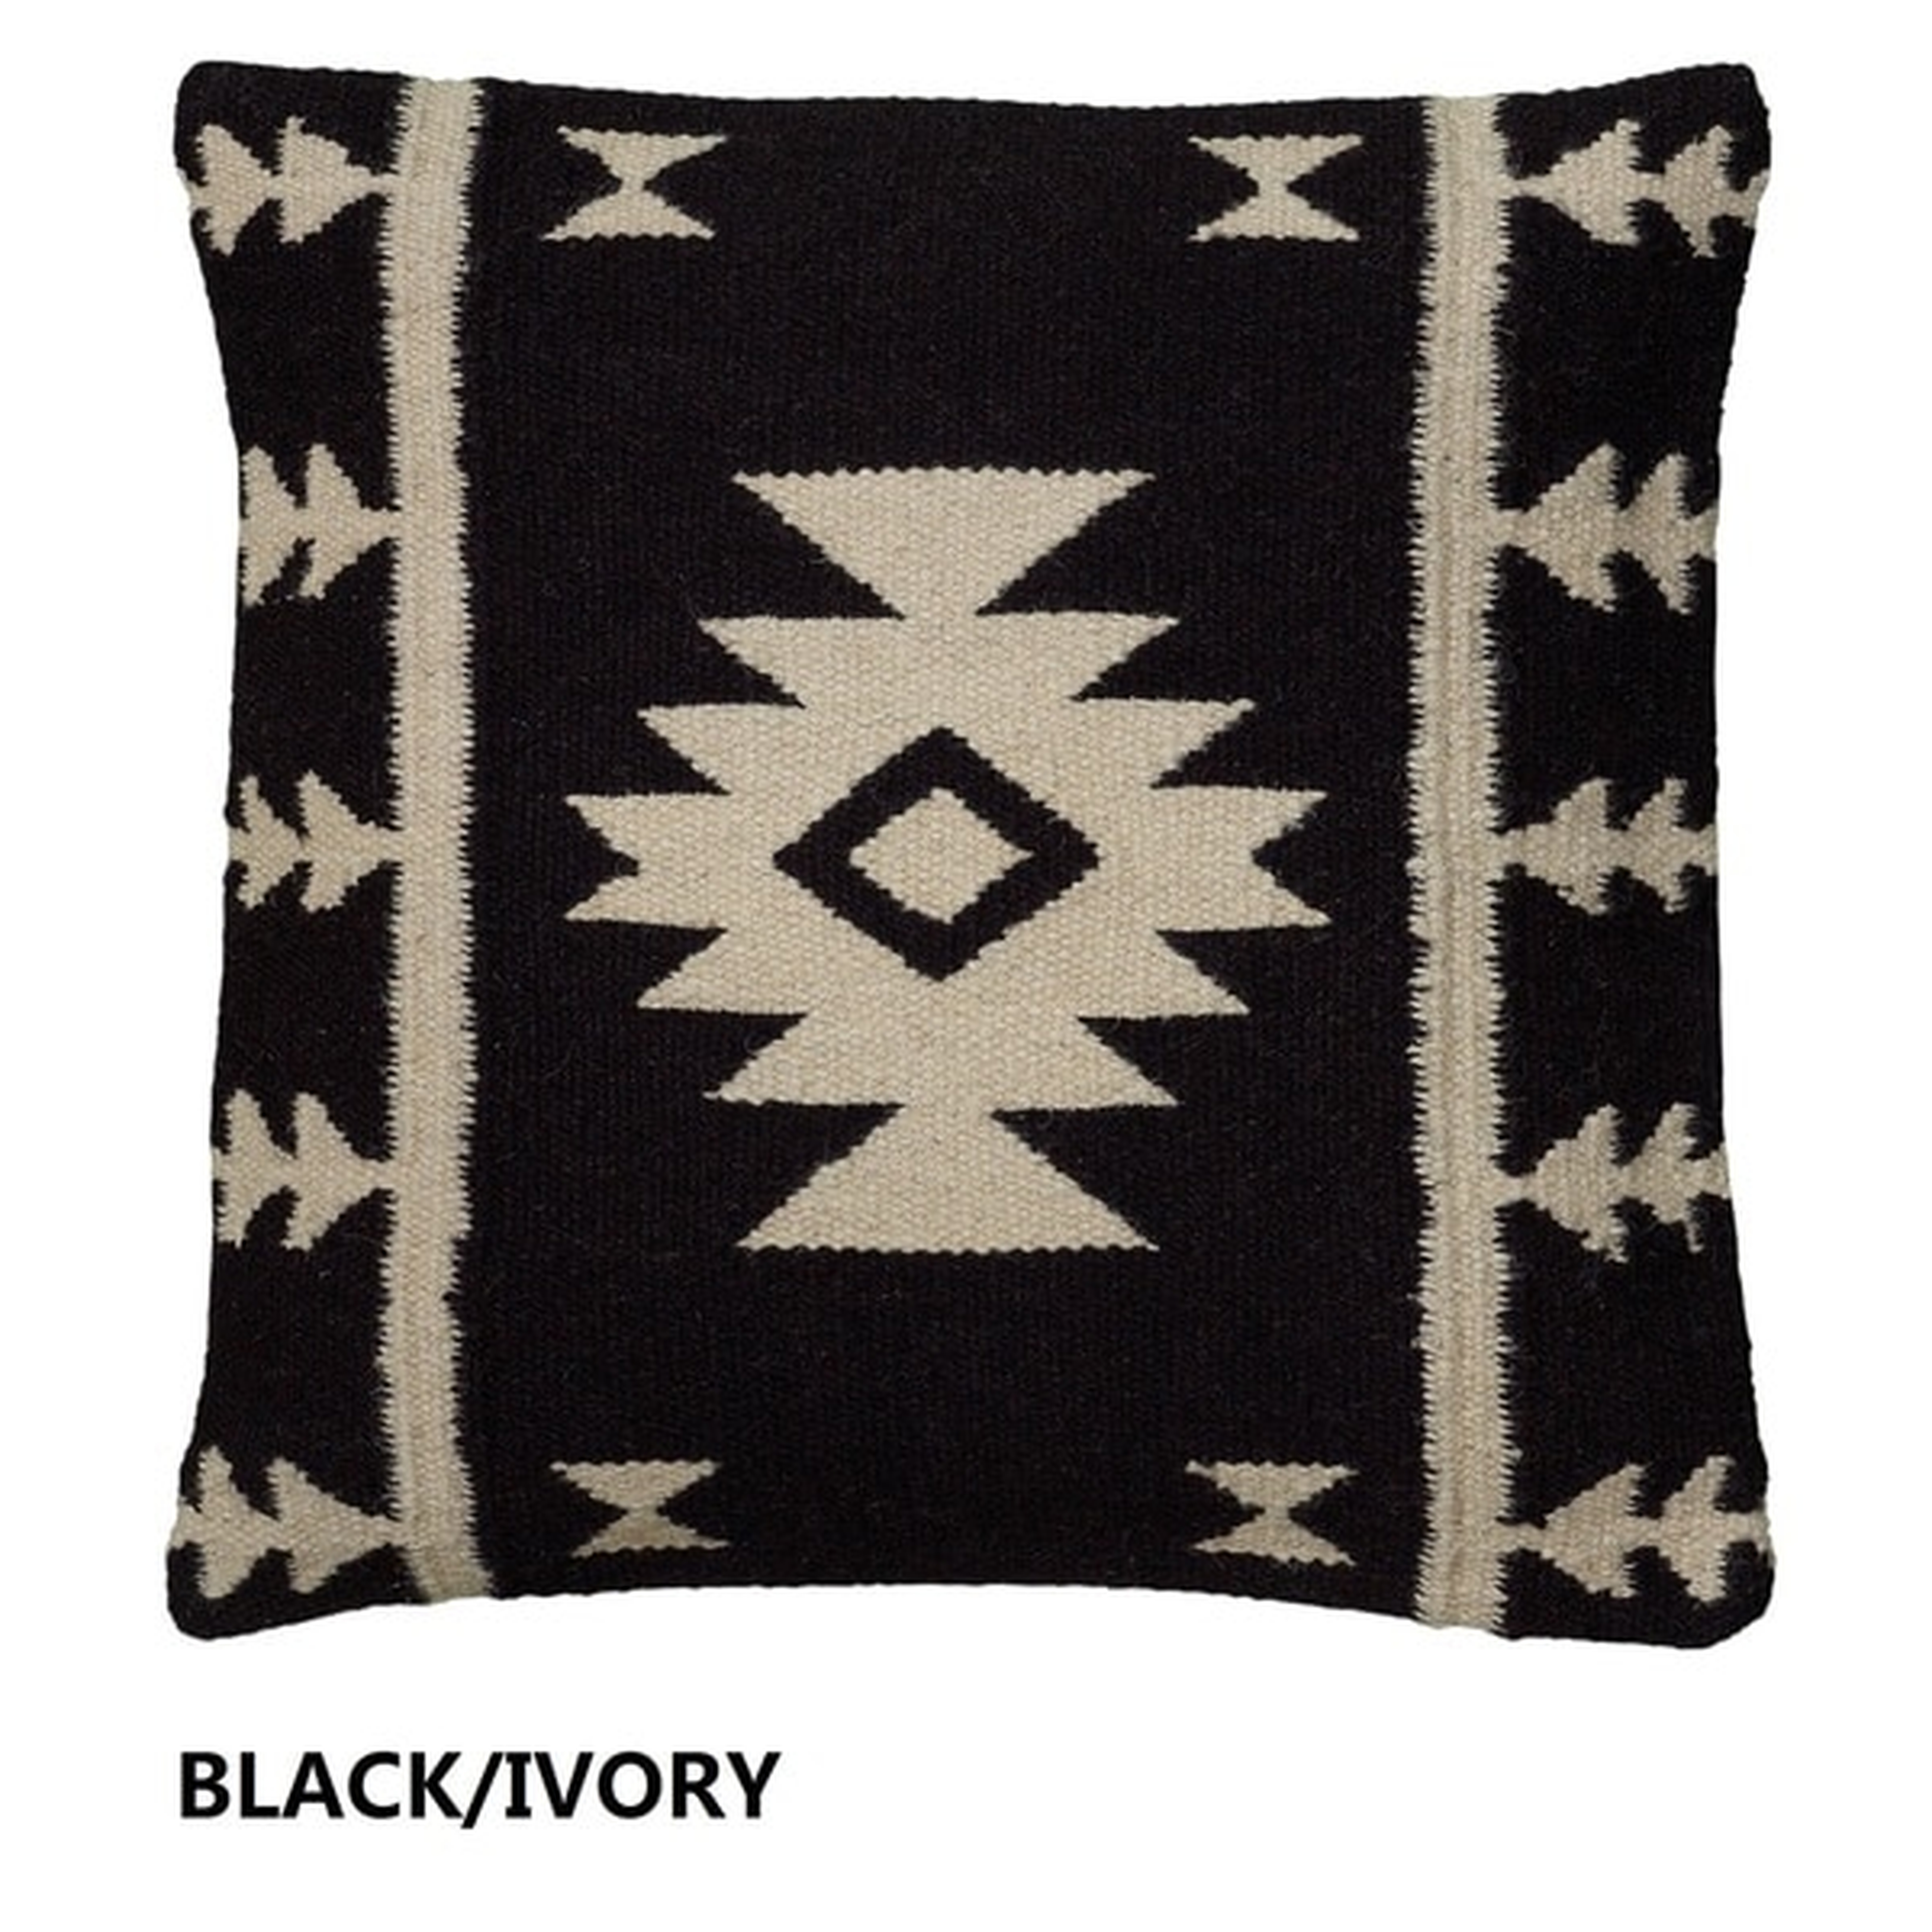 Woven Southwest-patterned Decorative Throw Pillow 18x18 with insert - Black/Ivory - Overstock